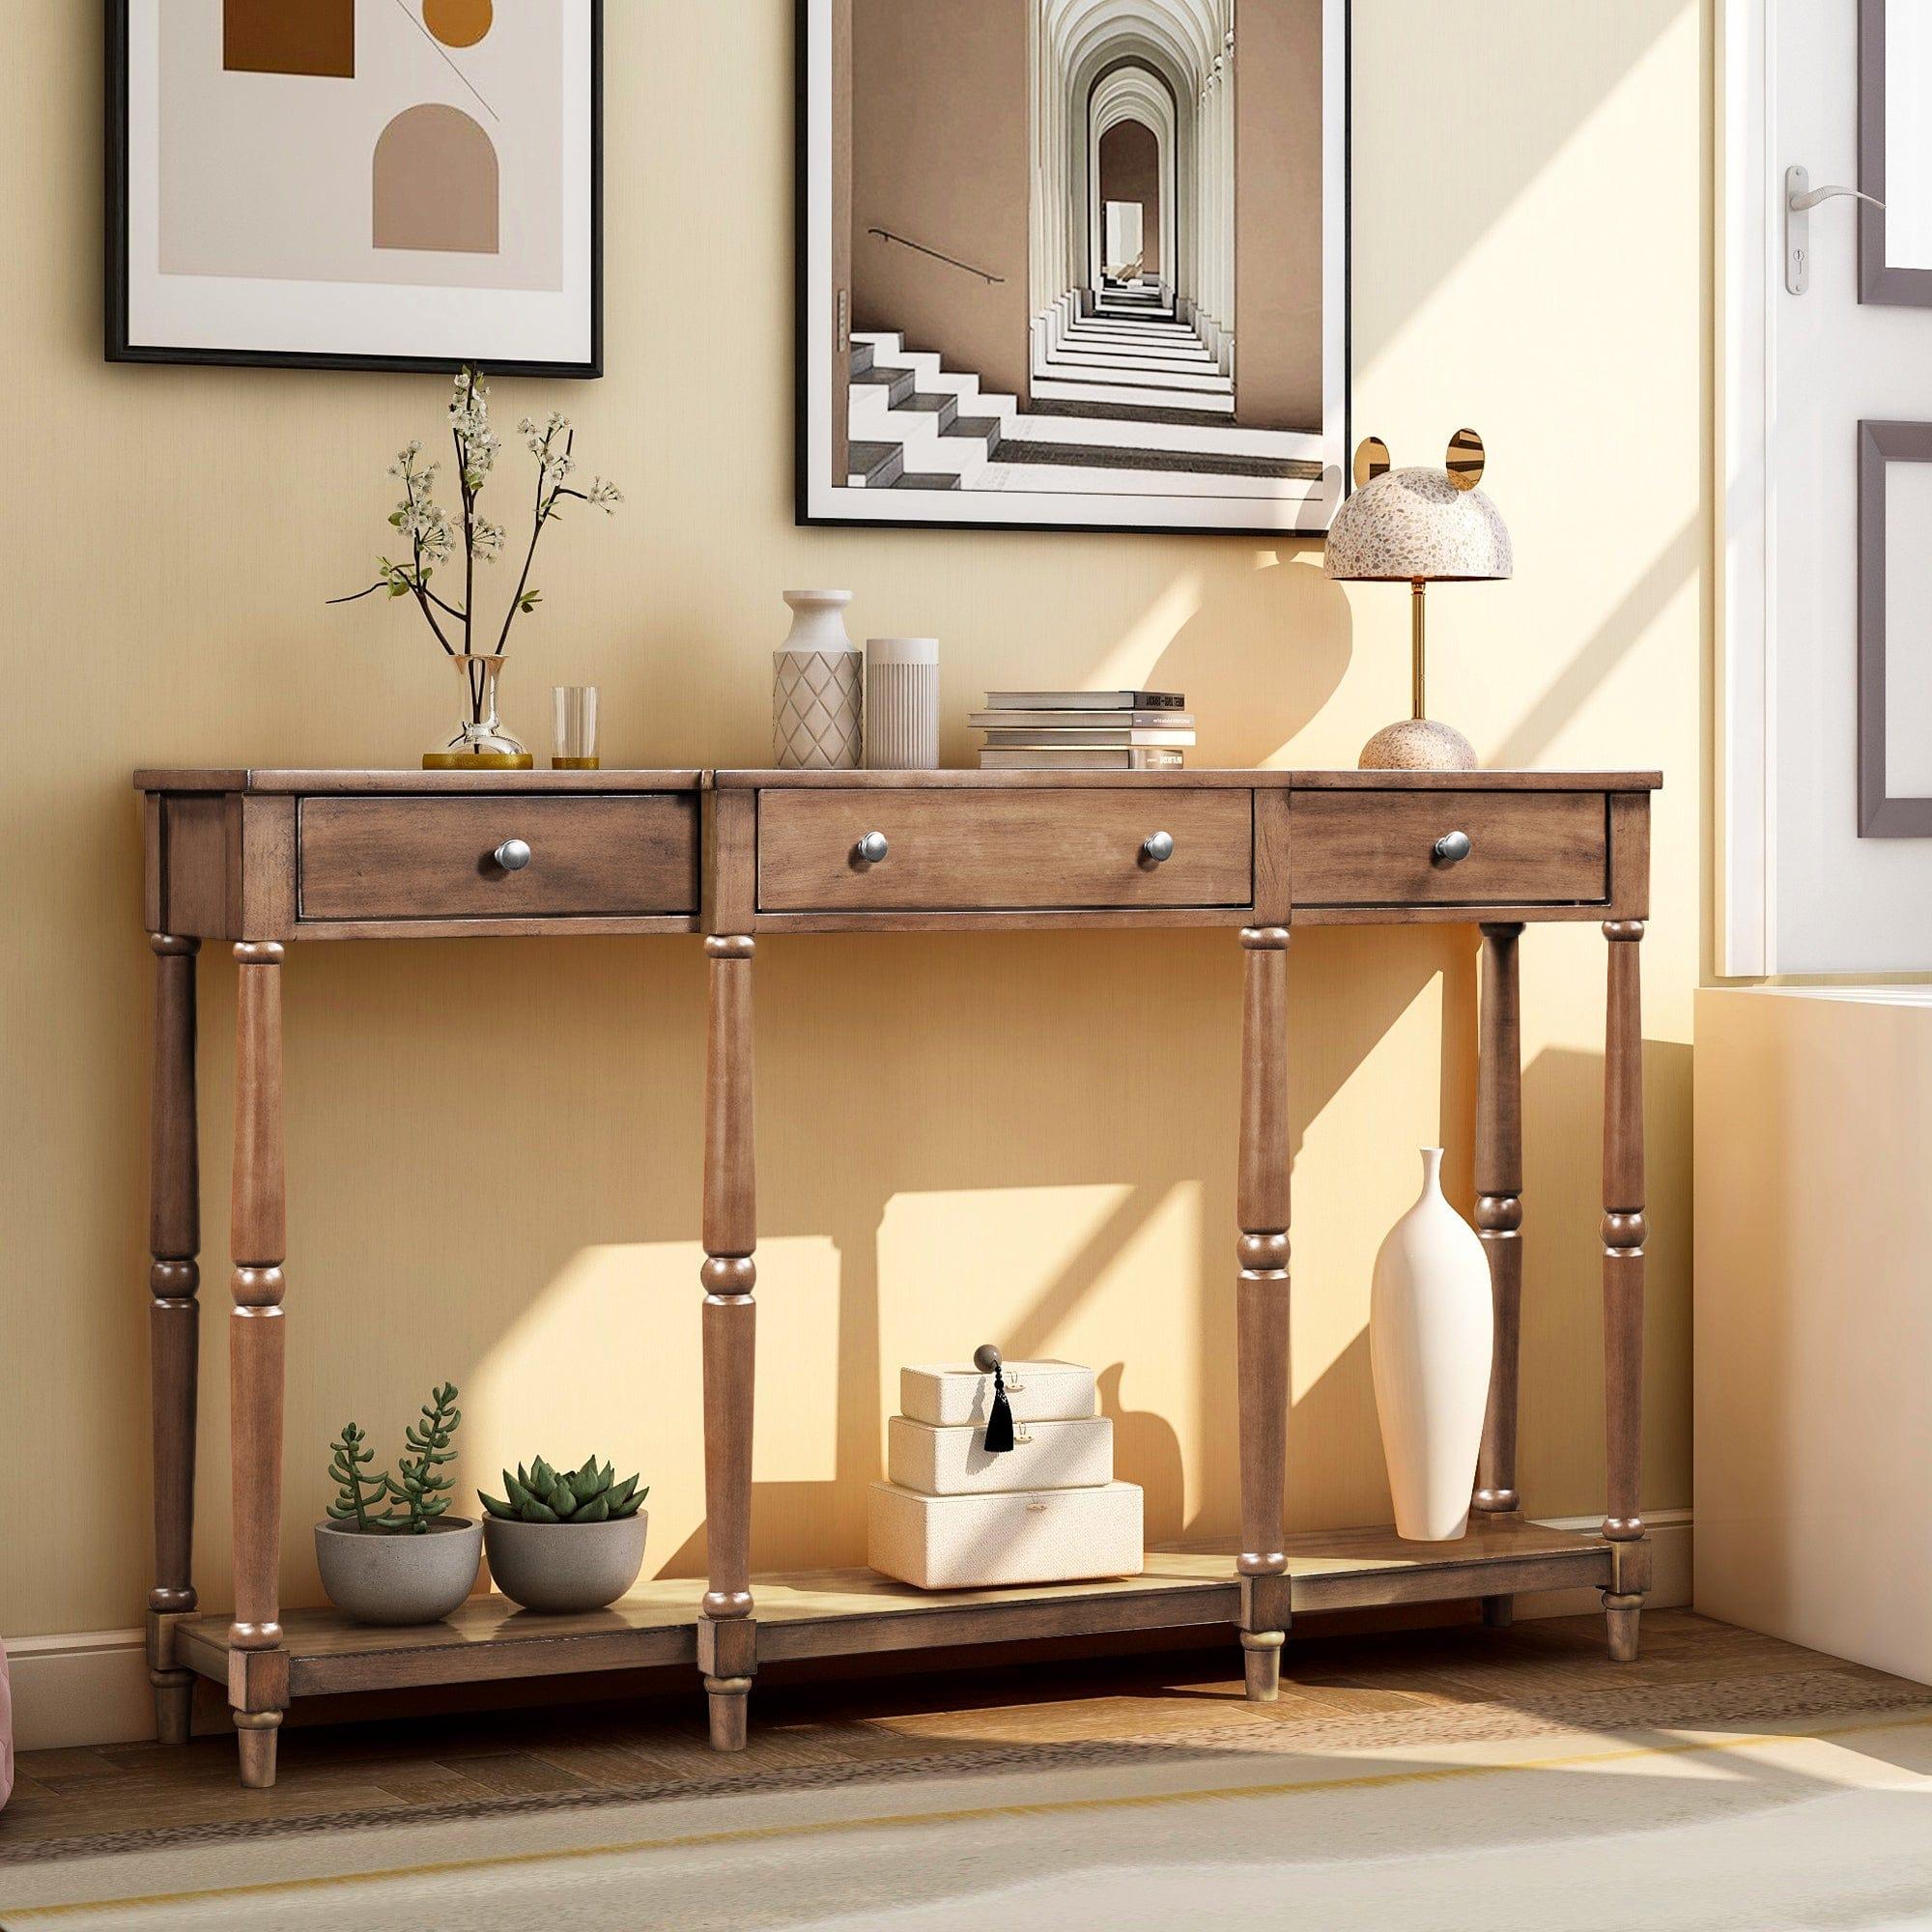 Shop NEW SKU: WF298211AAD----U_STYLE Solid Wood Console Table, Classic Entryway Table with Storage Shelf and Drawer for Home Mademoiselle Home Decor